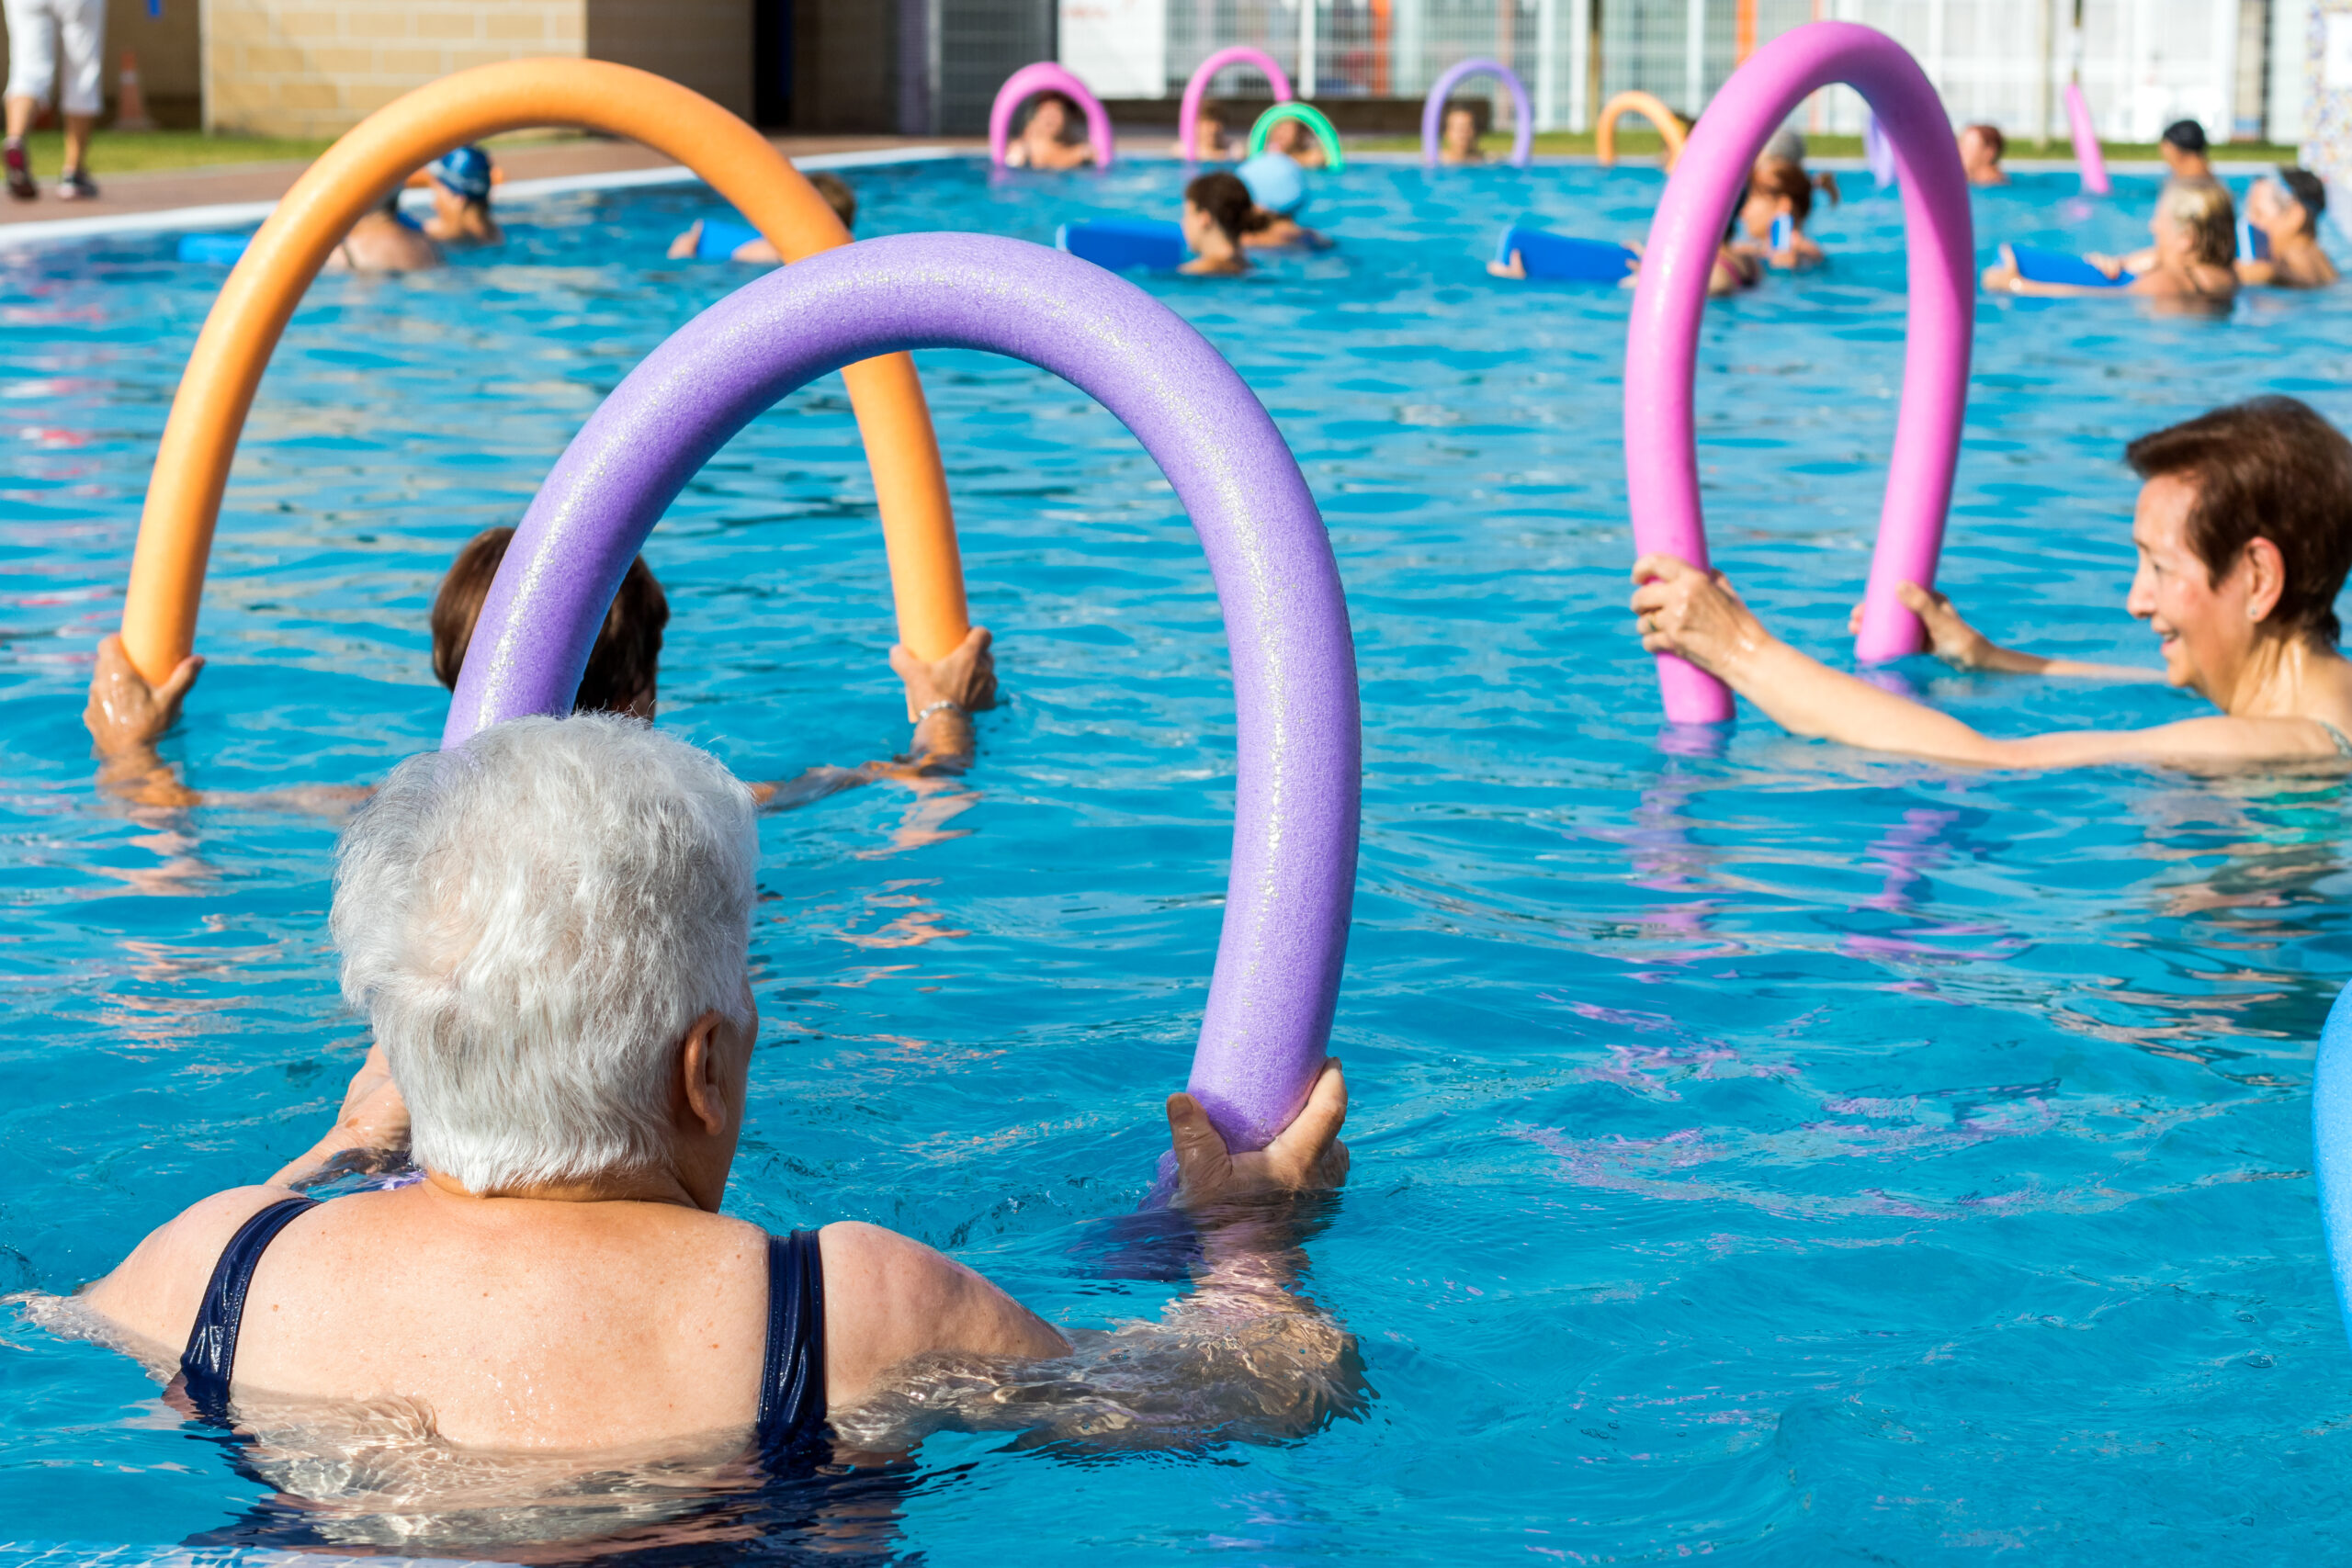 Elderly individuals engaged in various activities by the pool, demonstrating a vibrant and active lifestyle for seniors.